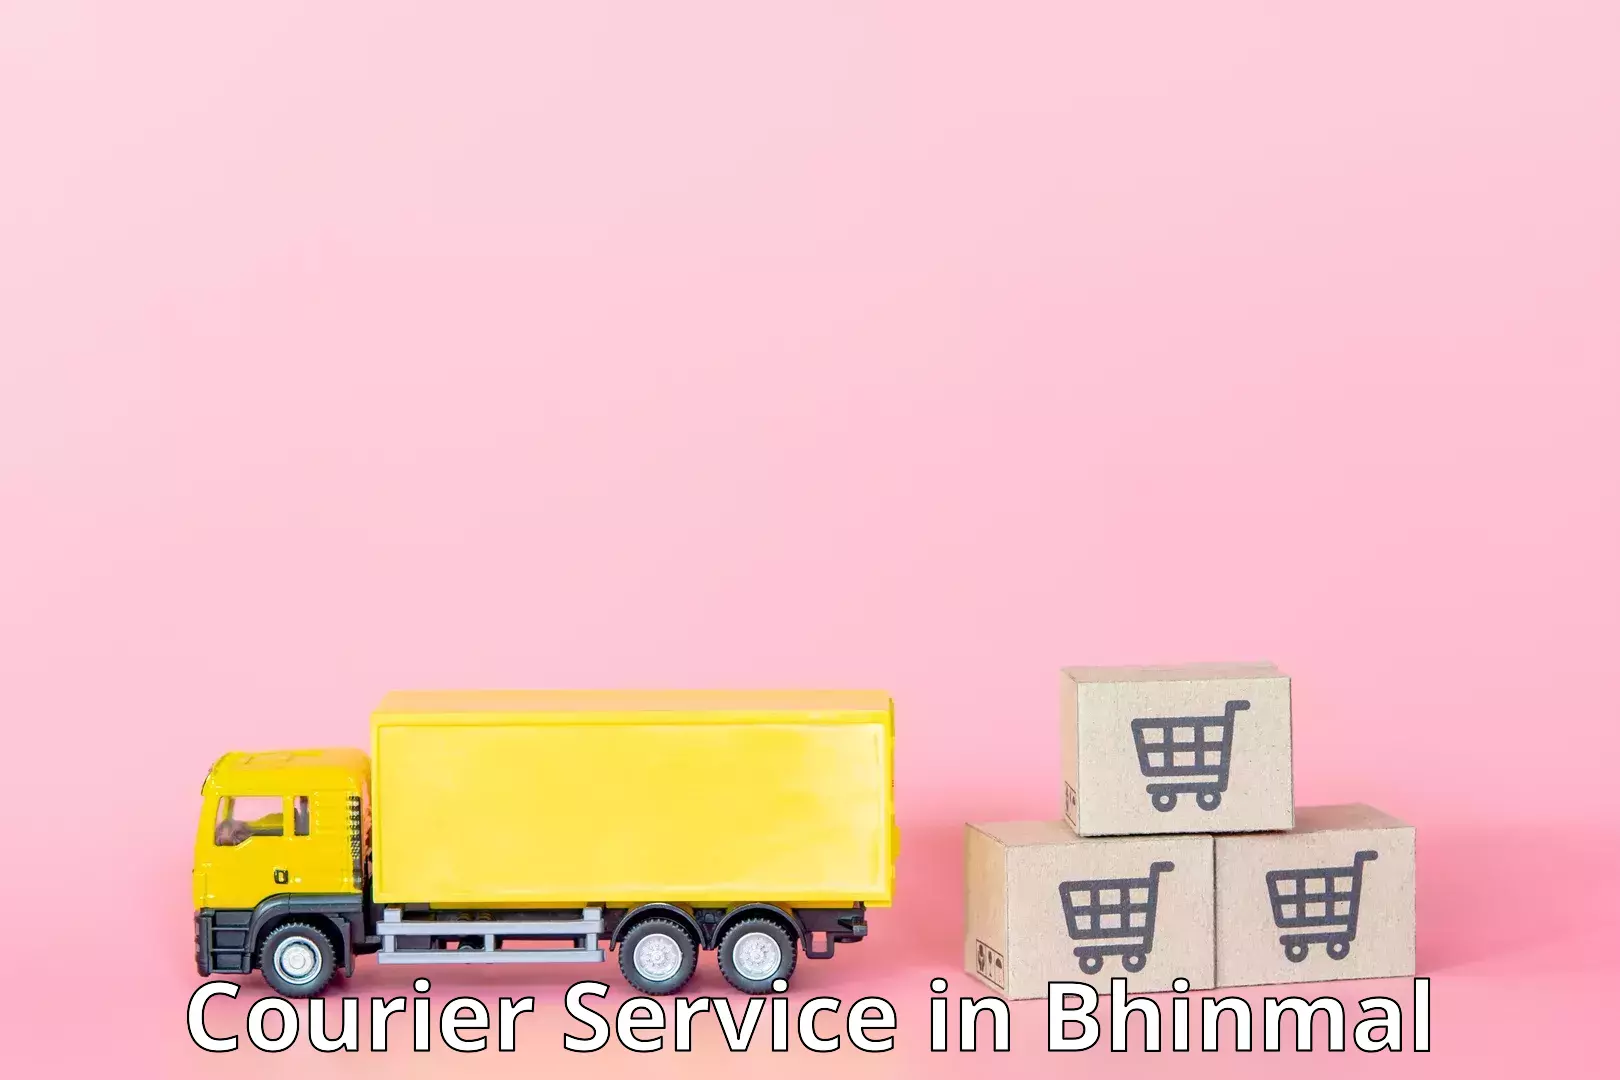 Fast shipping solutions in Bhinmal